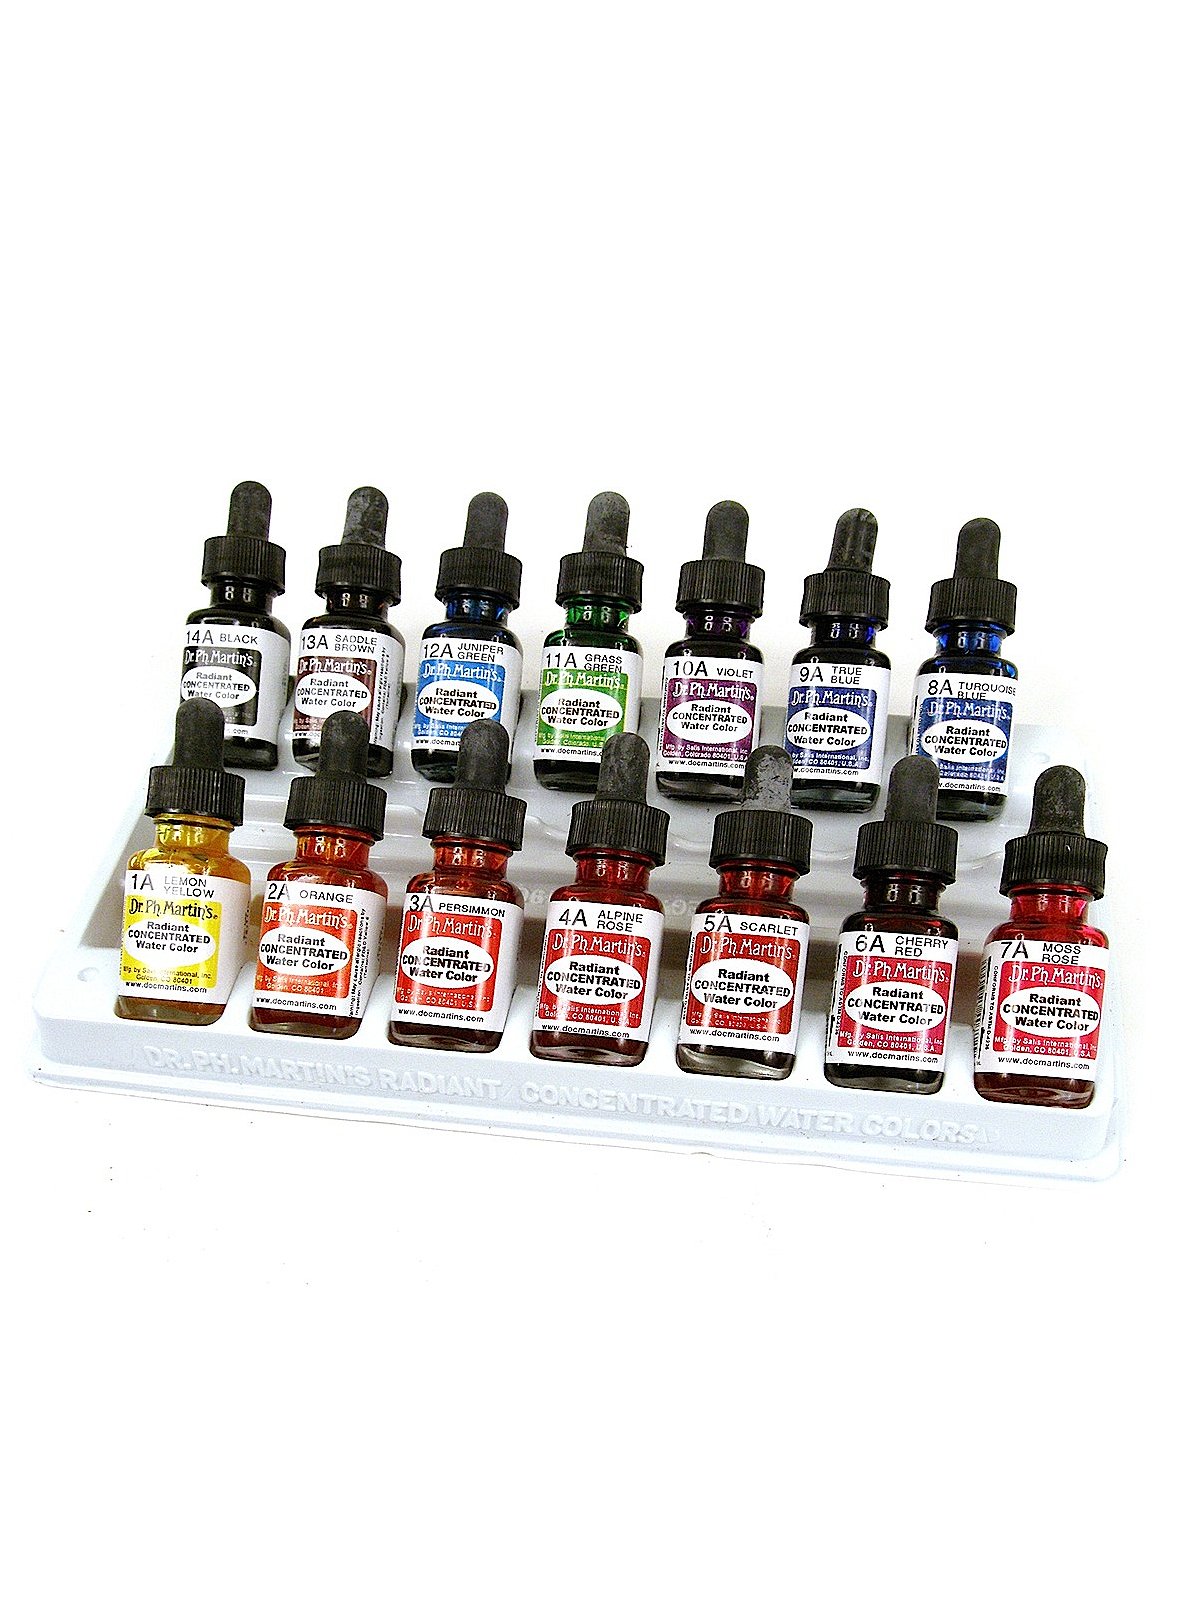 Dr. Ph. Martin's Radiant Concentrated Watercolor Sets